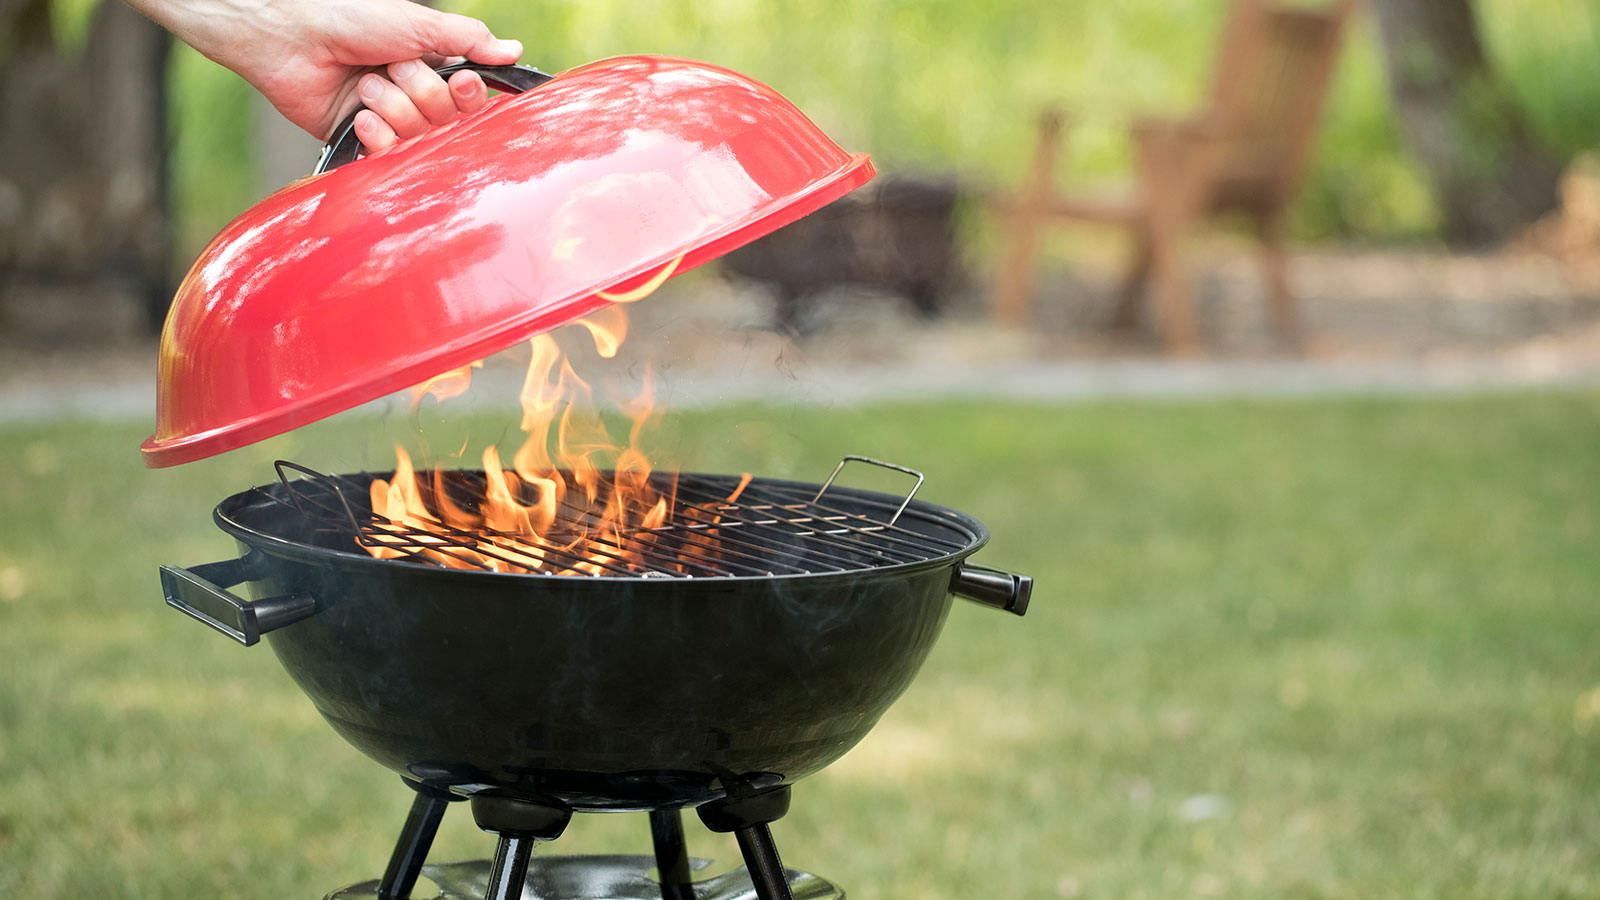 How to light a charcoal grill: simple methods to follow